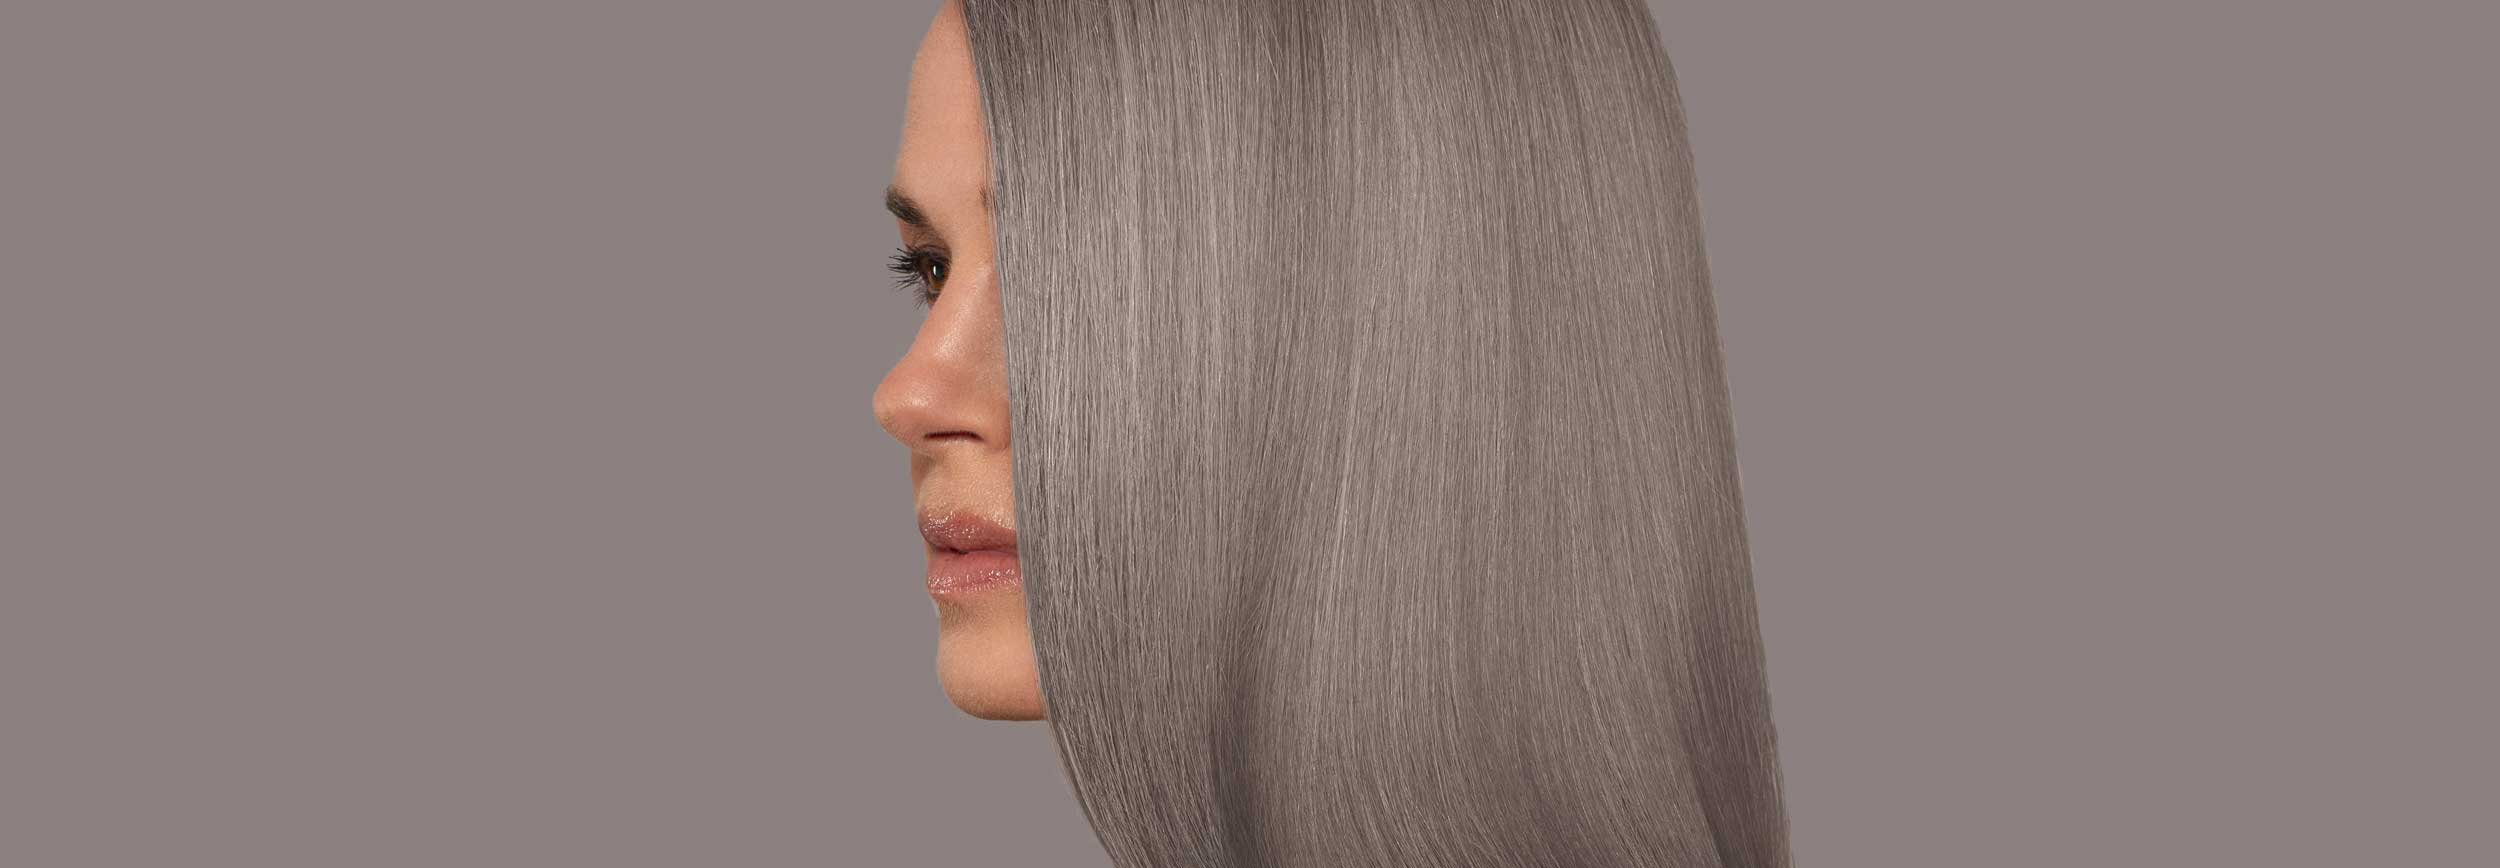 Embracing the Gray Hair Trend - Revlon Professional